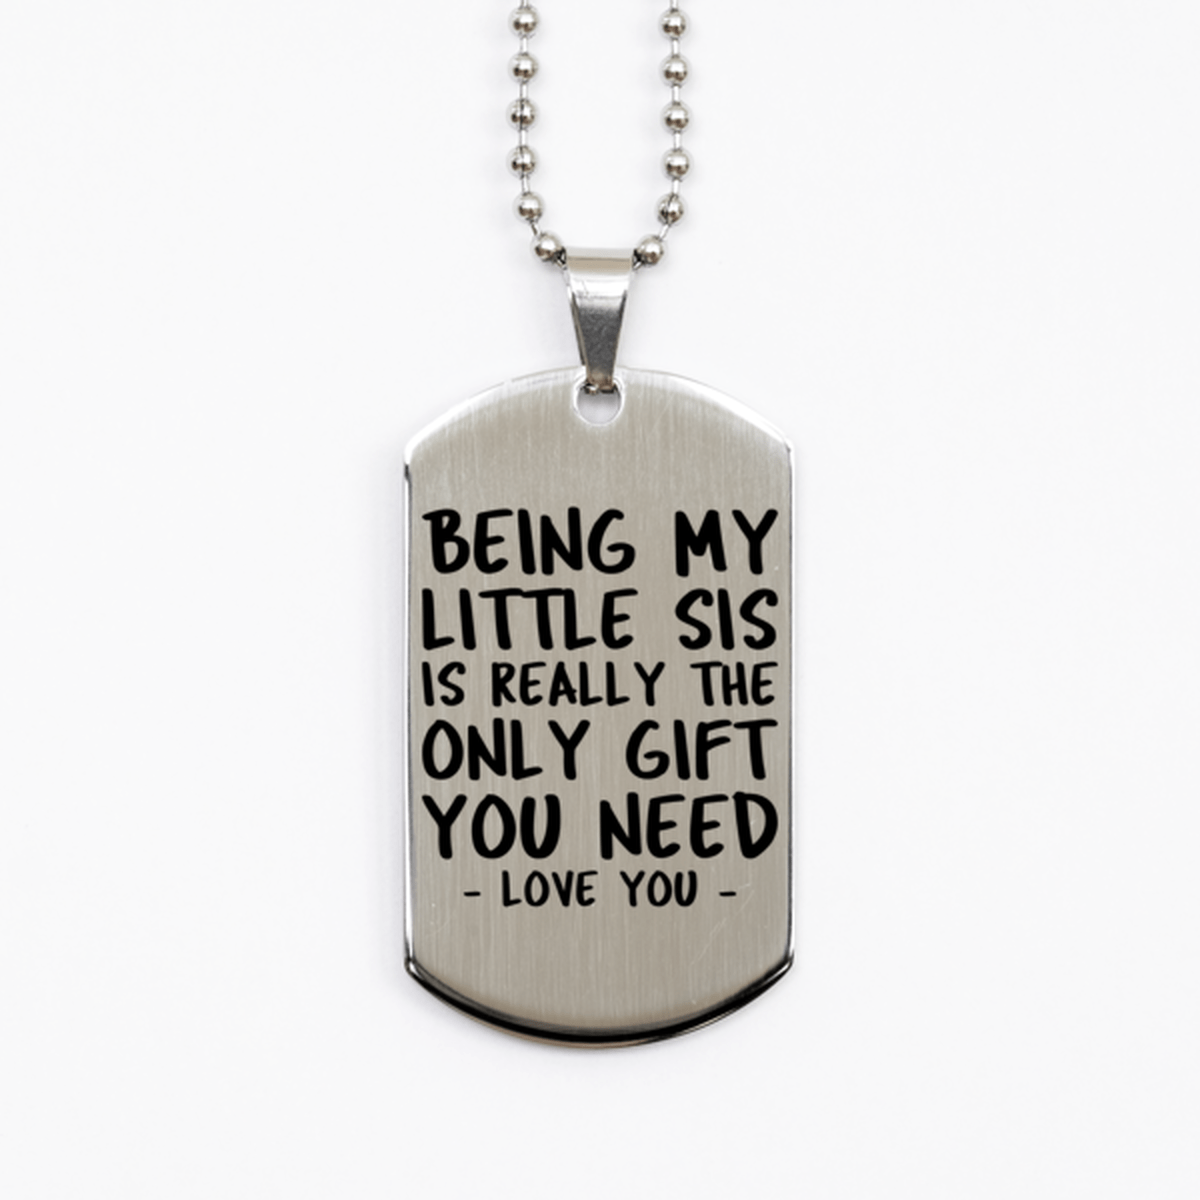 Funny Little Sis Silver Dog Tag Necklace, Being My Little Sis Is Really the Only Gift You Need, Best Birthday Gifts for Little Sis